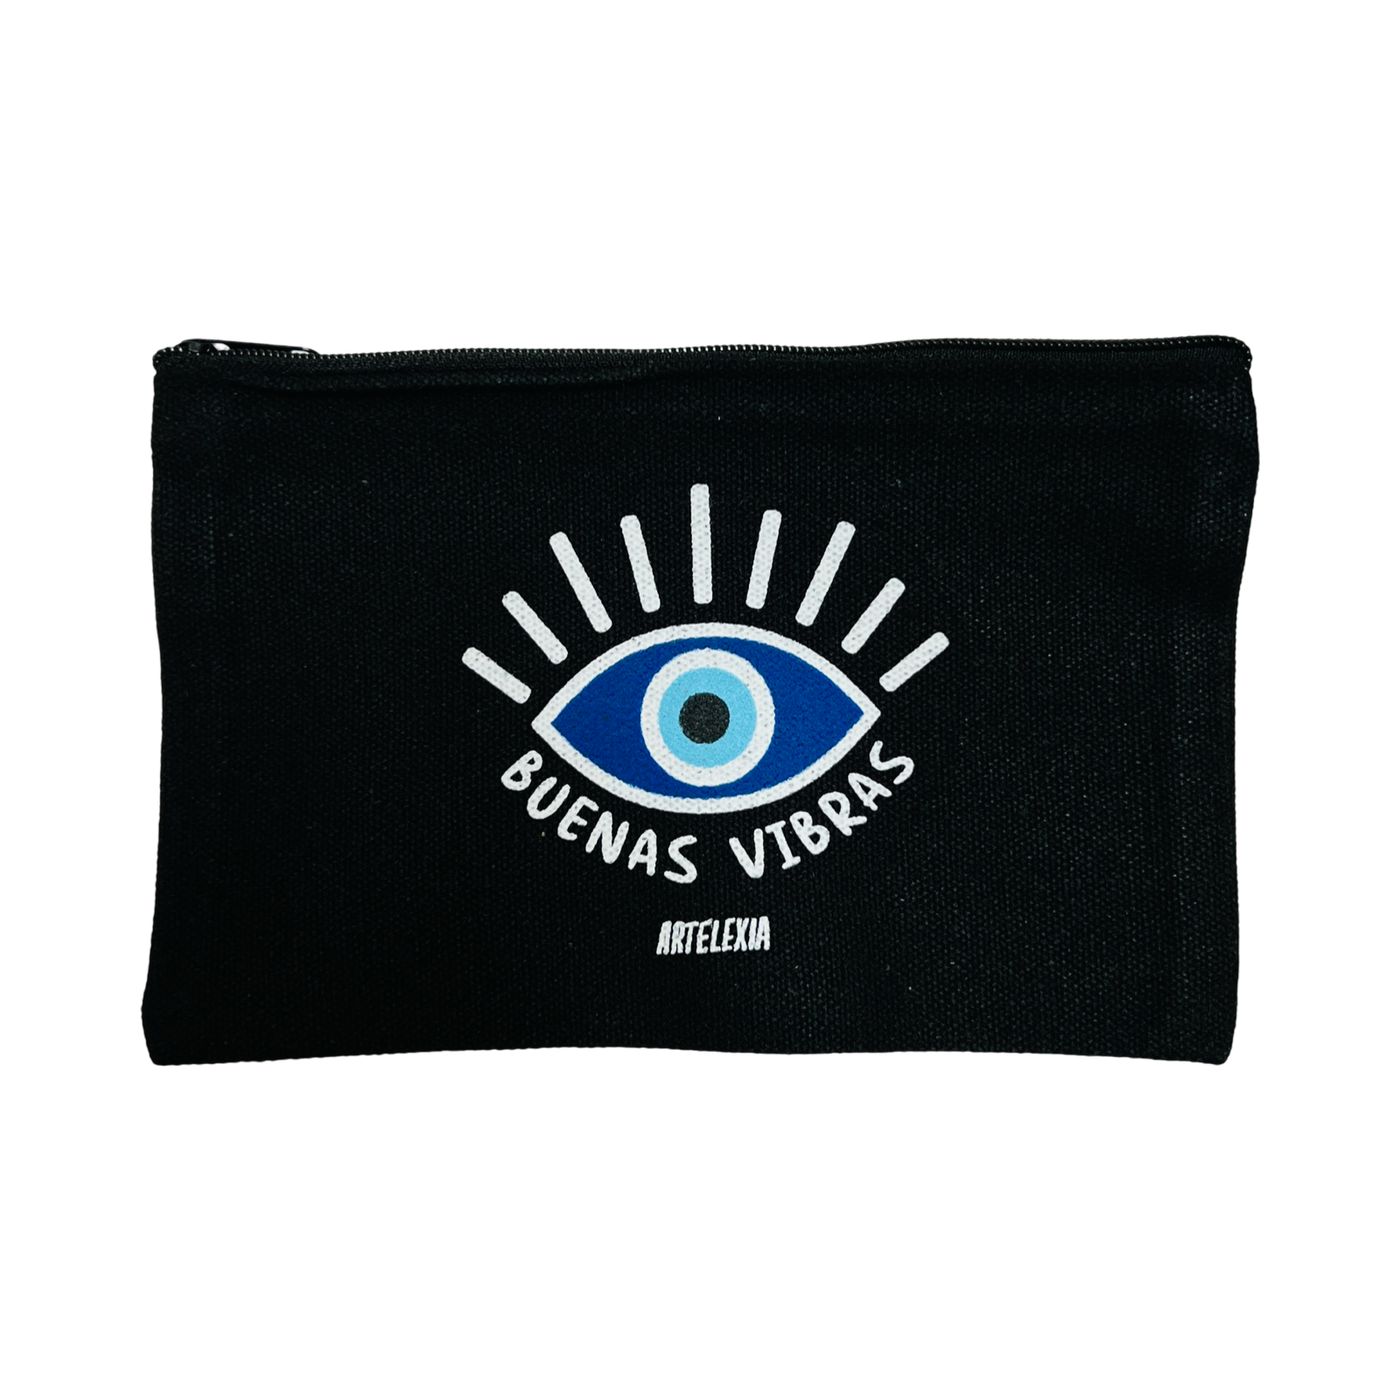 black canvas zip pouch with an image of a blue eye and the phrase buenas vibras in white lettering.